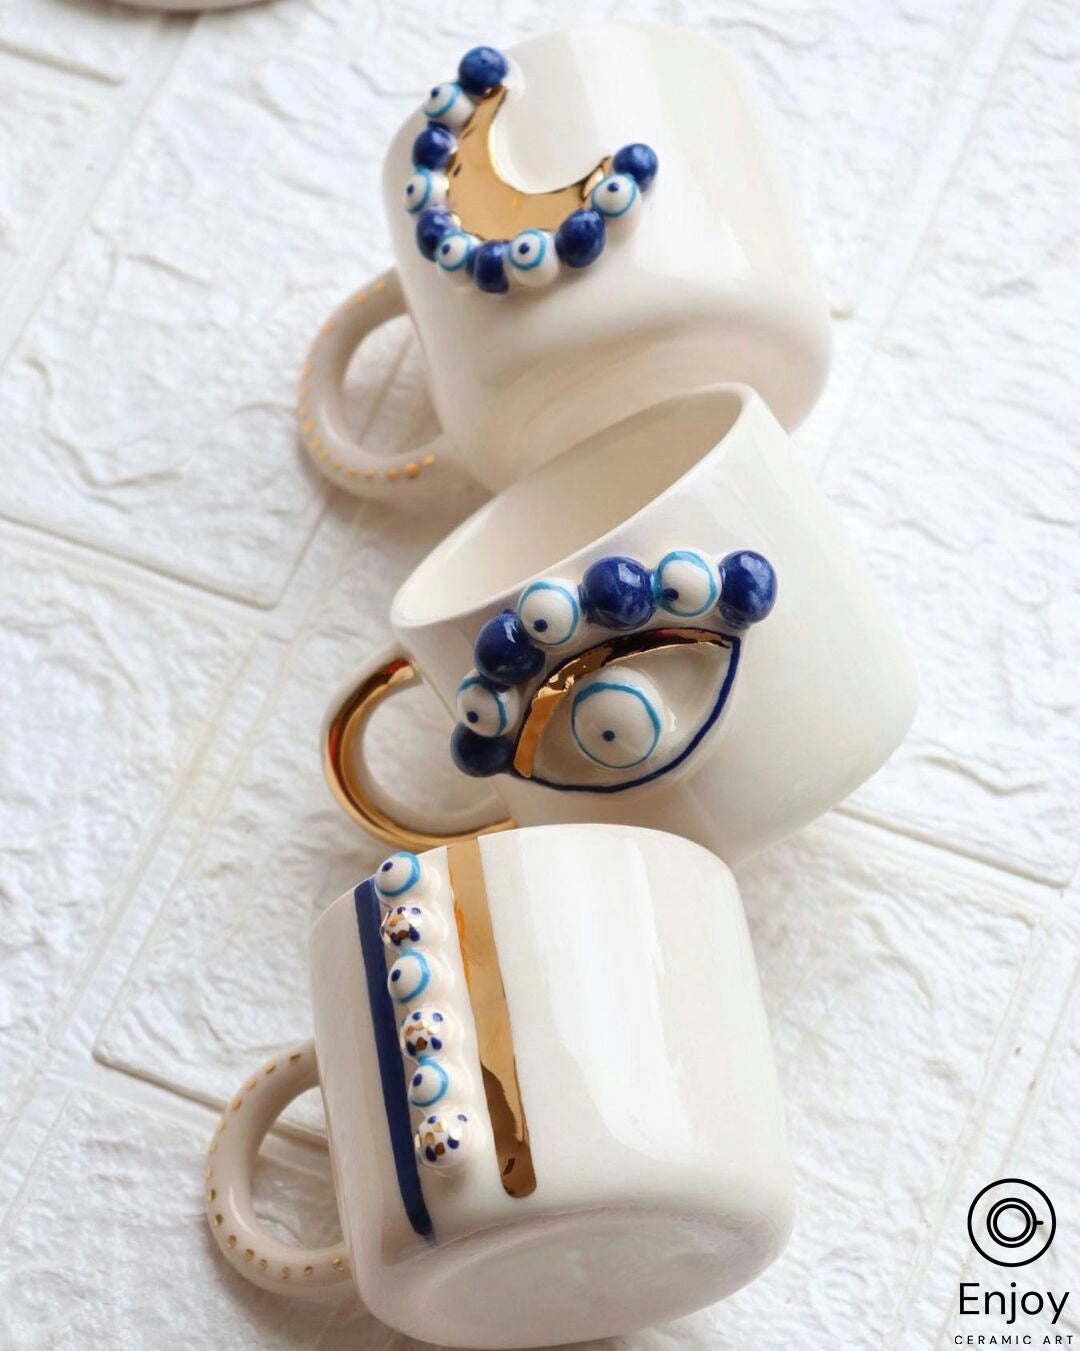 Three white ceramic mugs with golden details and blue evil eye designs, creatively stacked and angled to show each unique pattern, on a white textured surface evoking an elegant and artistic vibe.